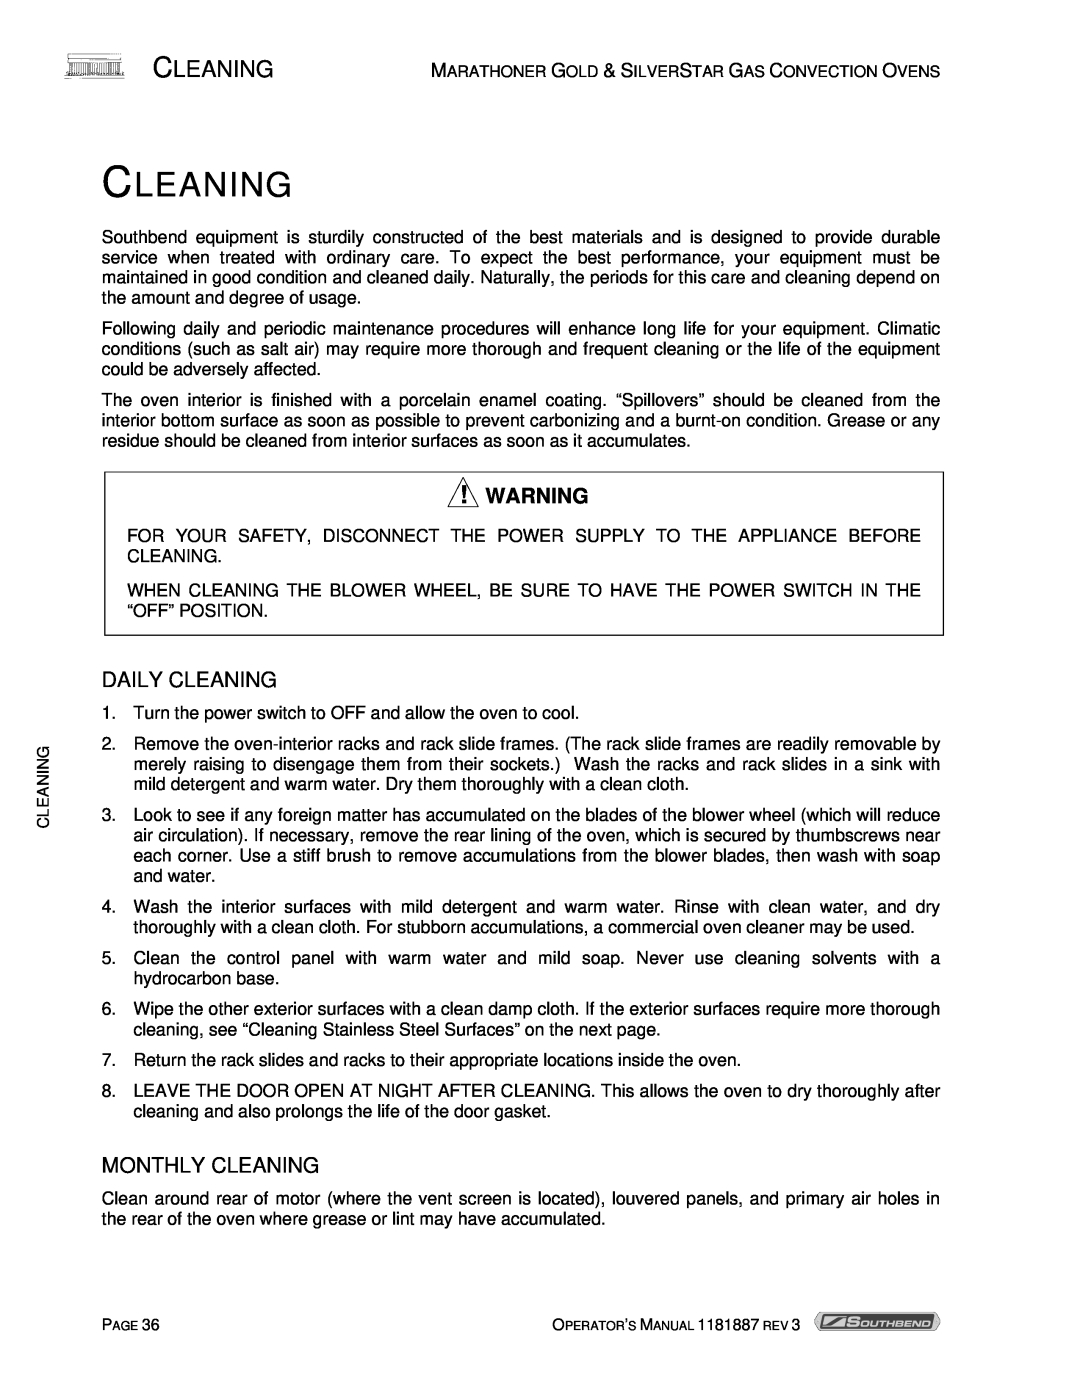 Southbend Marathoner manual Daily Cleaning, Monthly Cleaning 